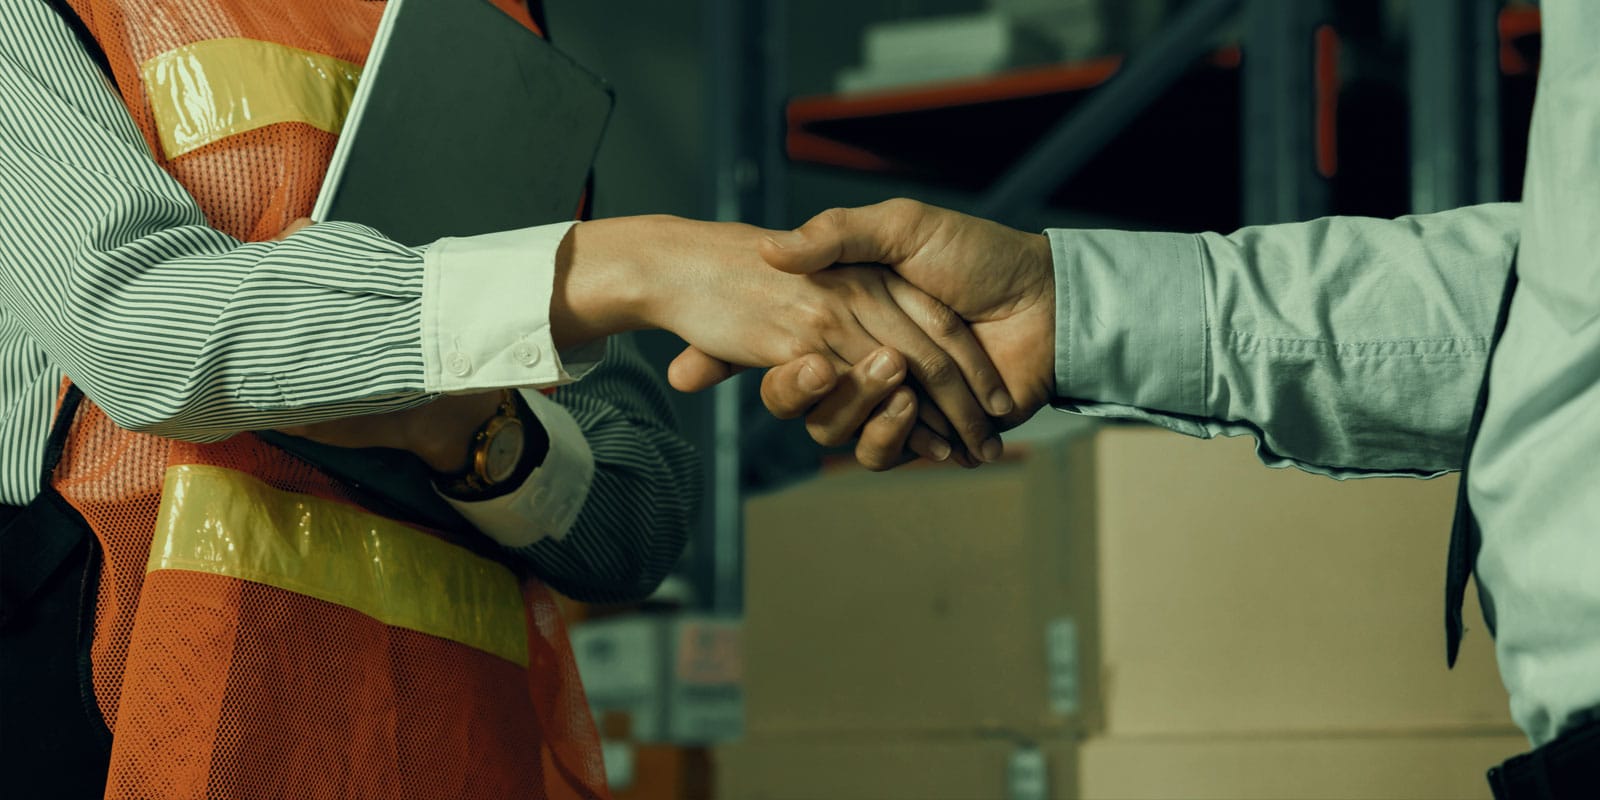 sales person and worker shaking hands